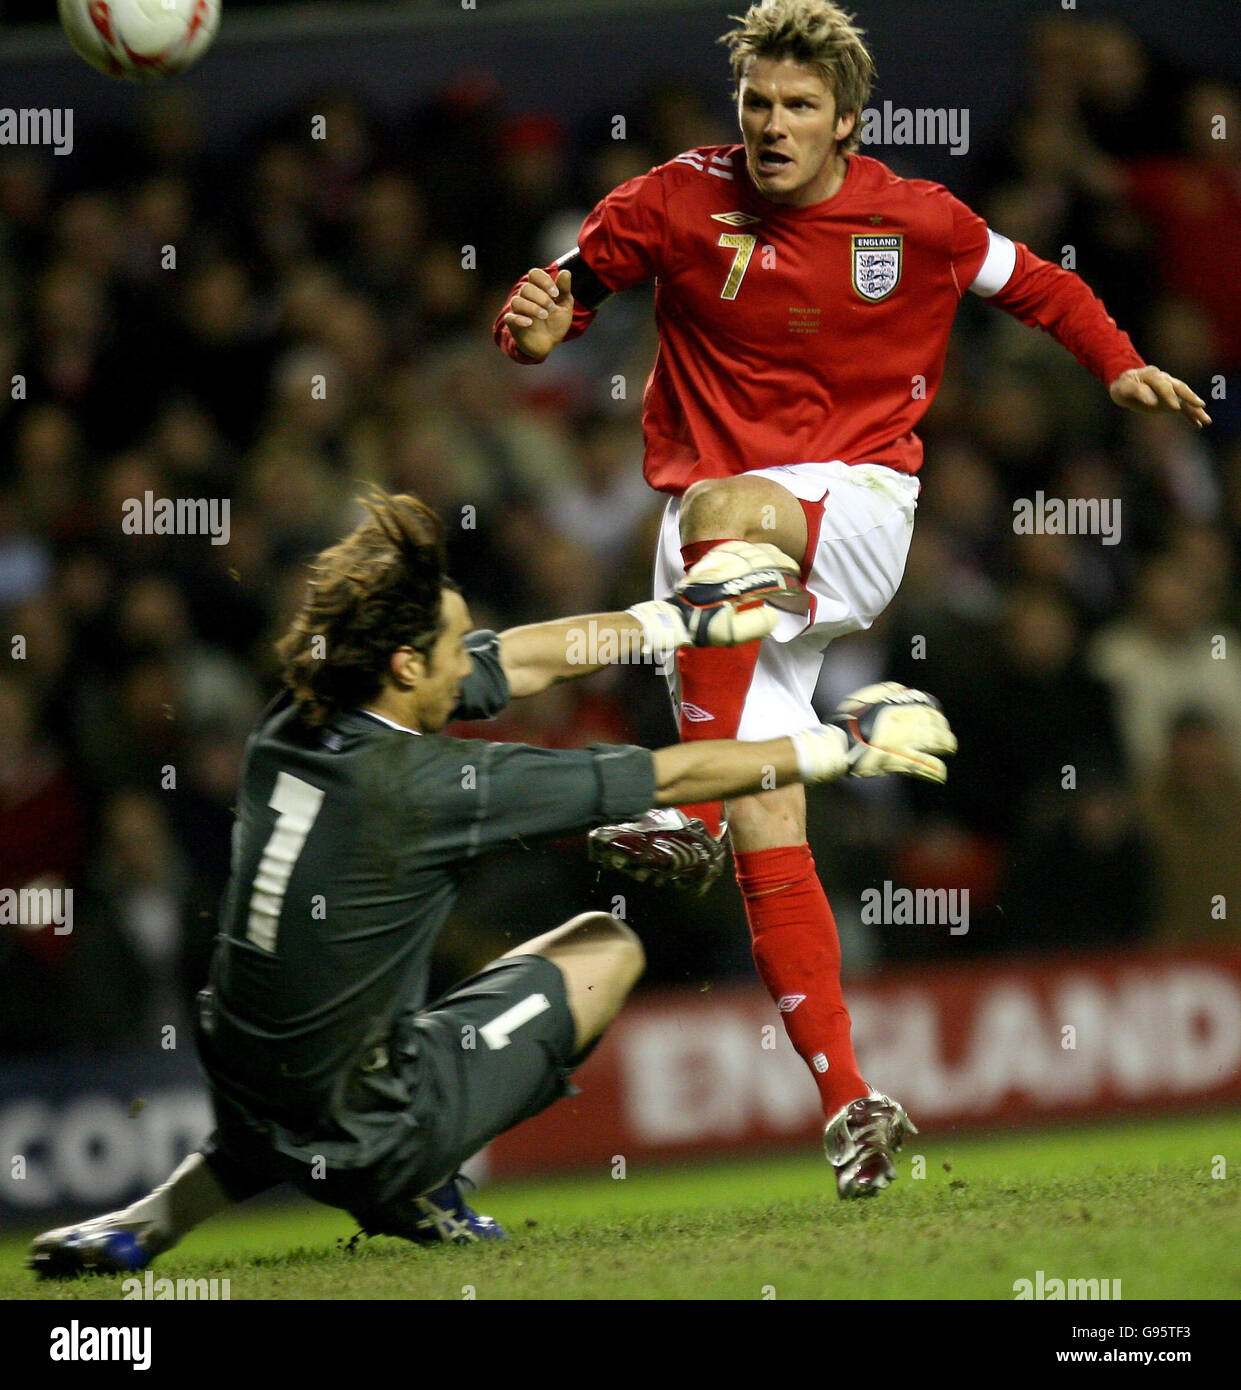 England's David Beckham (R) tries to chip past Uruguay's goalkeeper Fabian Carini during the friendly International match at Anfield, Liverpool, Wednesday March 1, 2006. PRESS ASSOCIATION Photo. Photo credit should read: Owen Humphreys/PA. Stock Photo